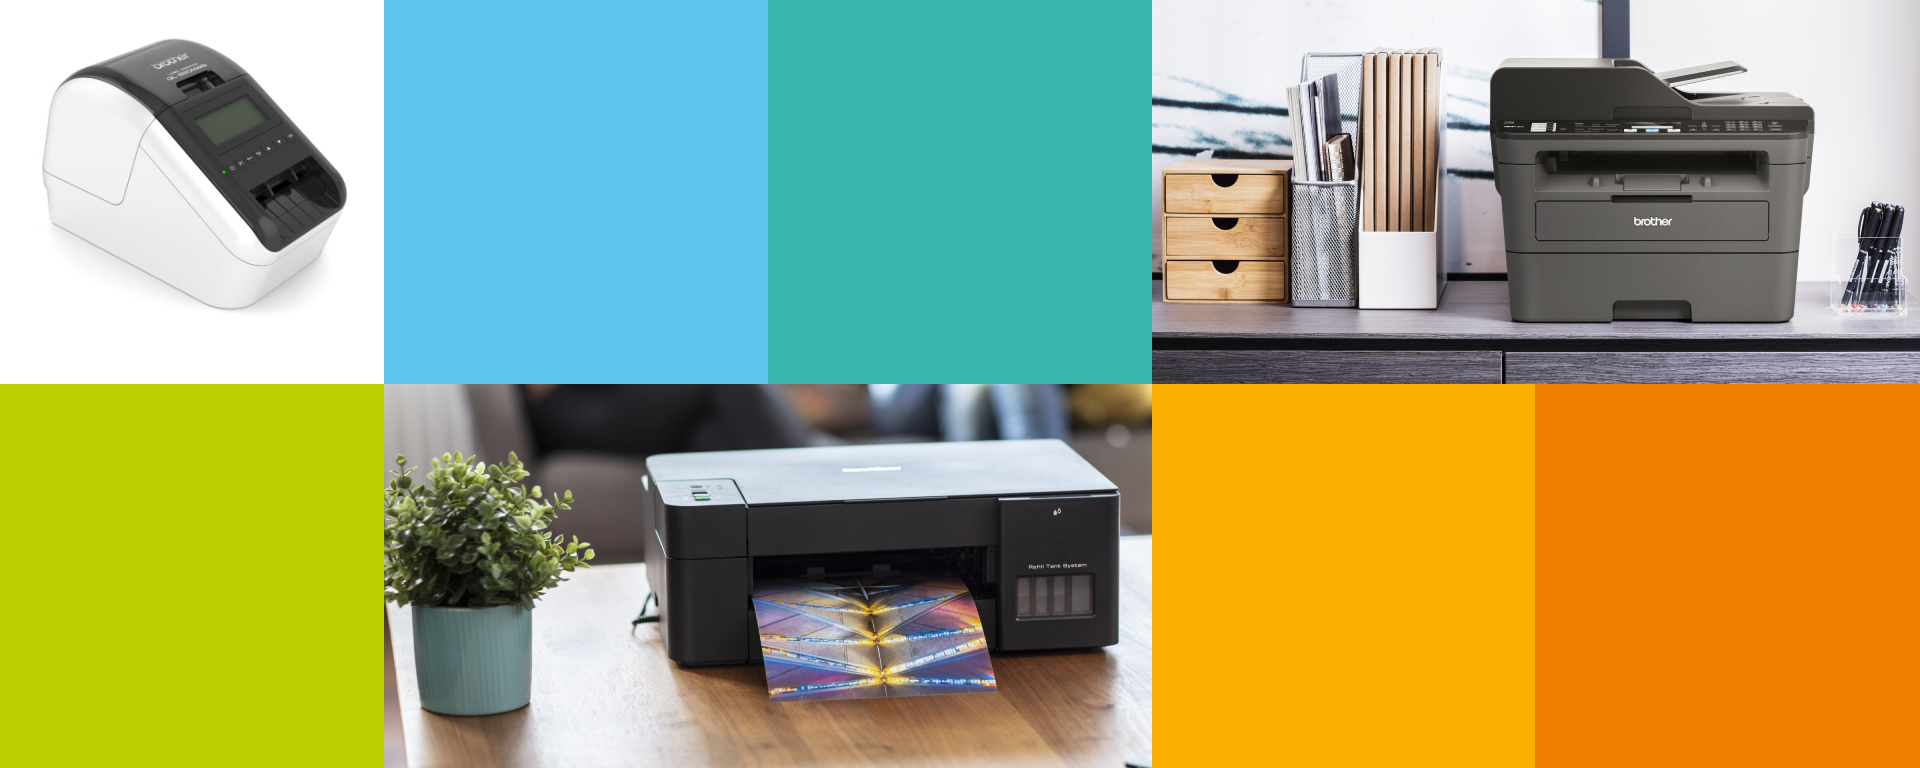 Inkjet, laser or direct thermal printing: how do you choose what’s best for your business?